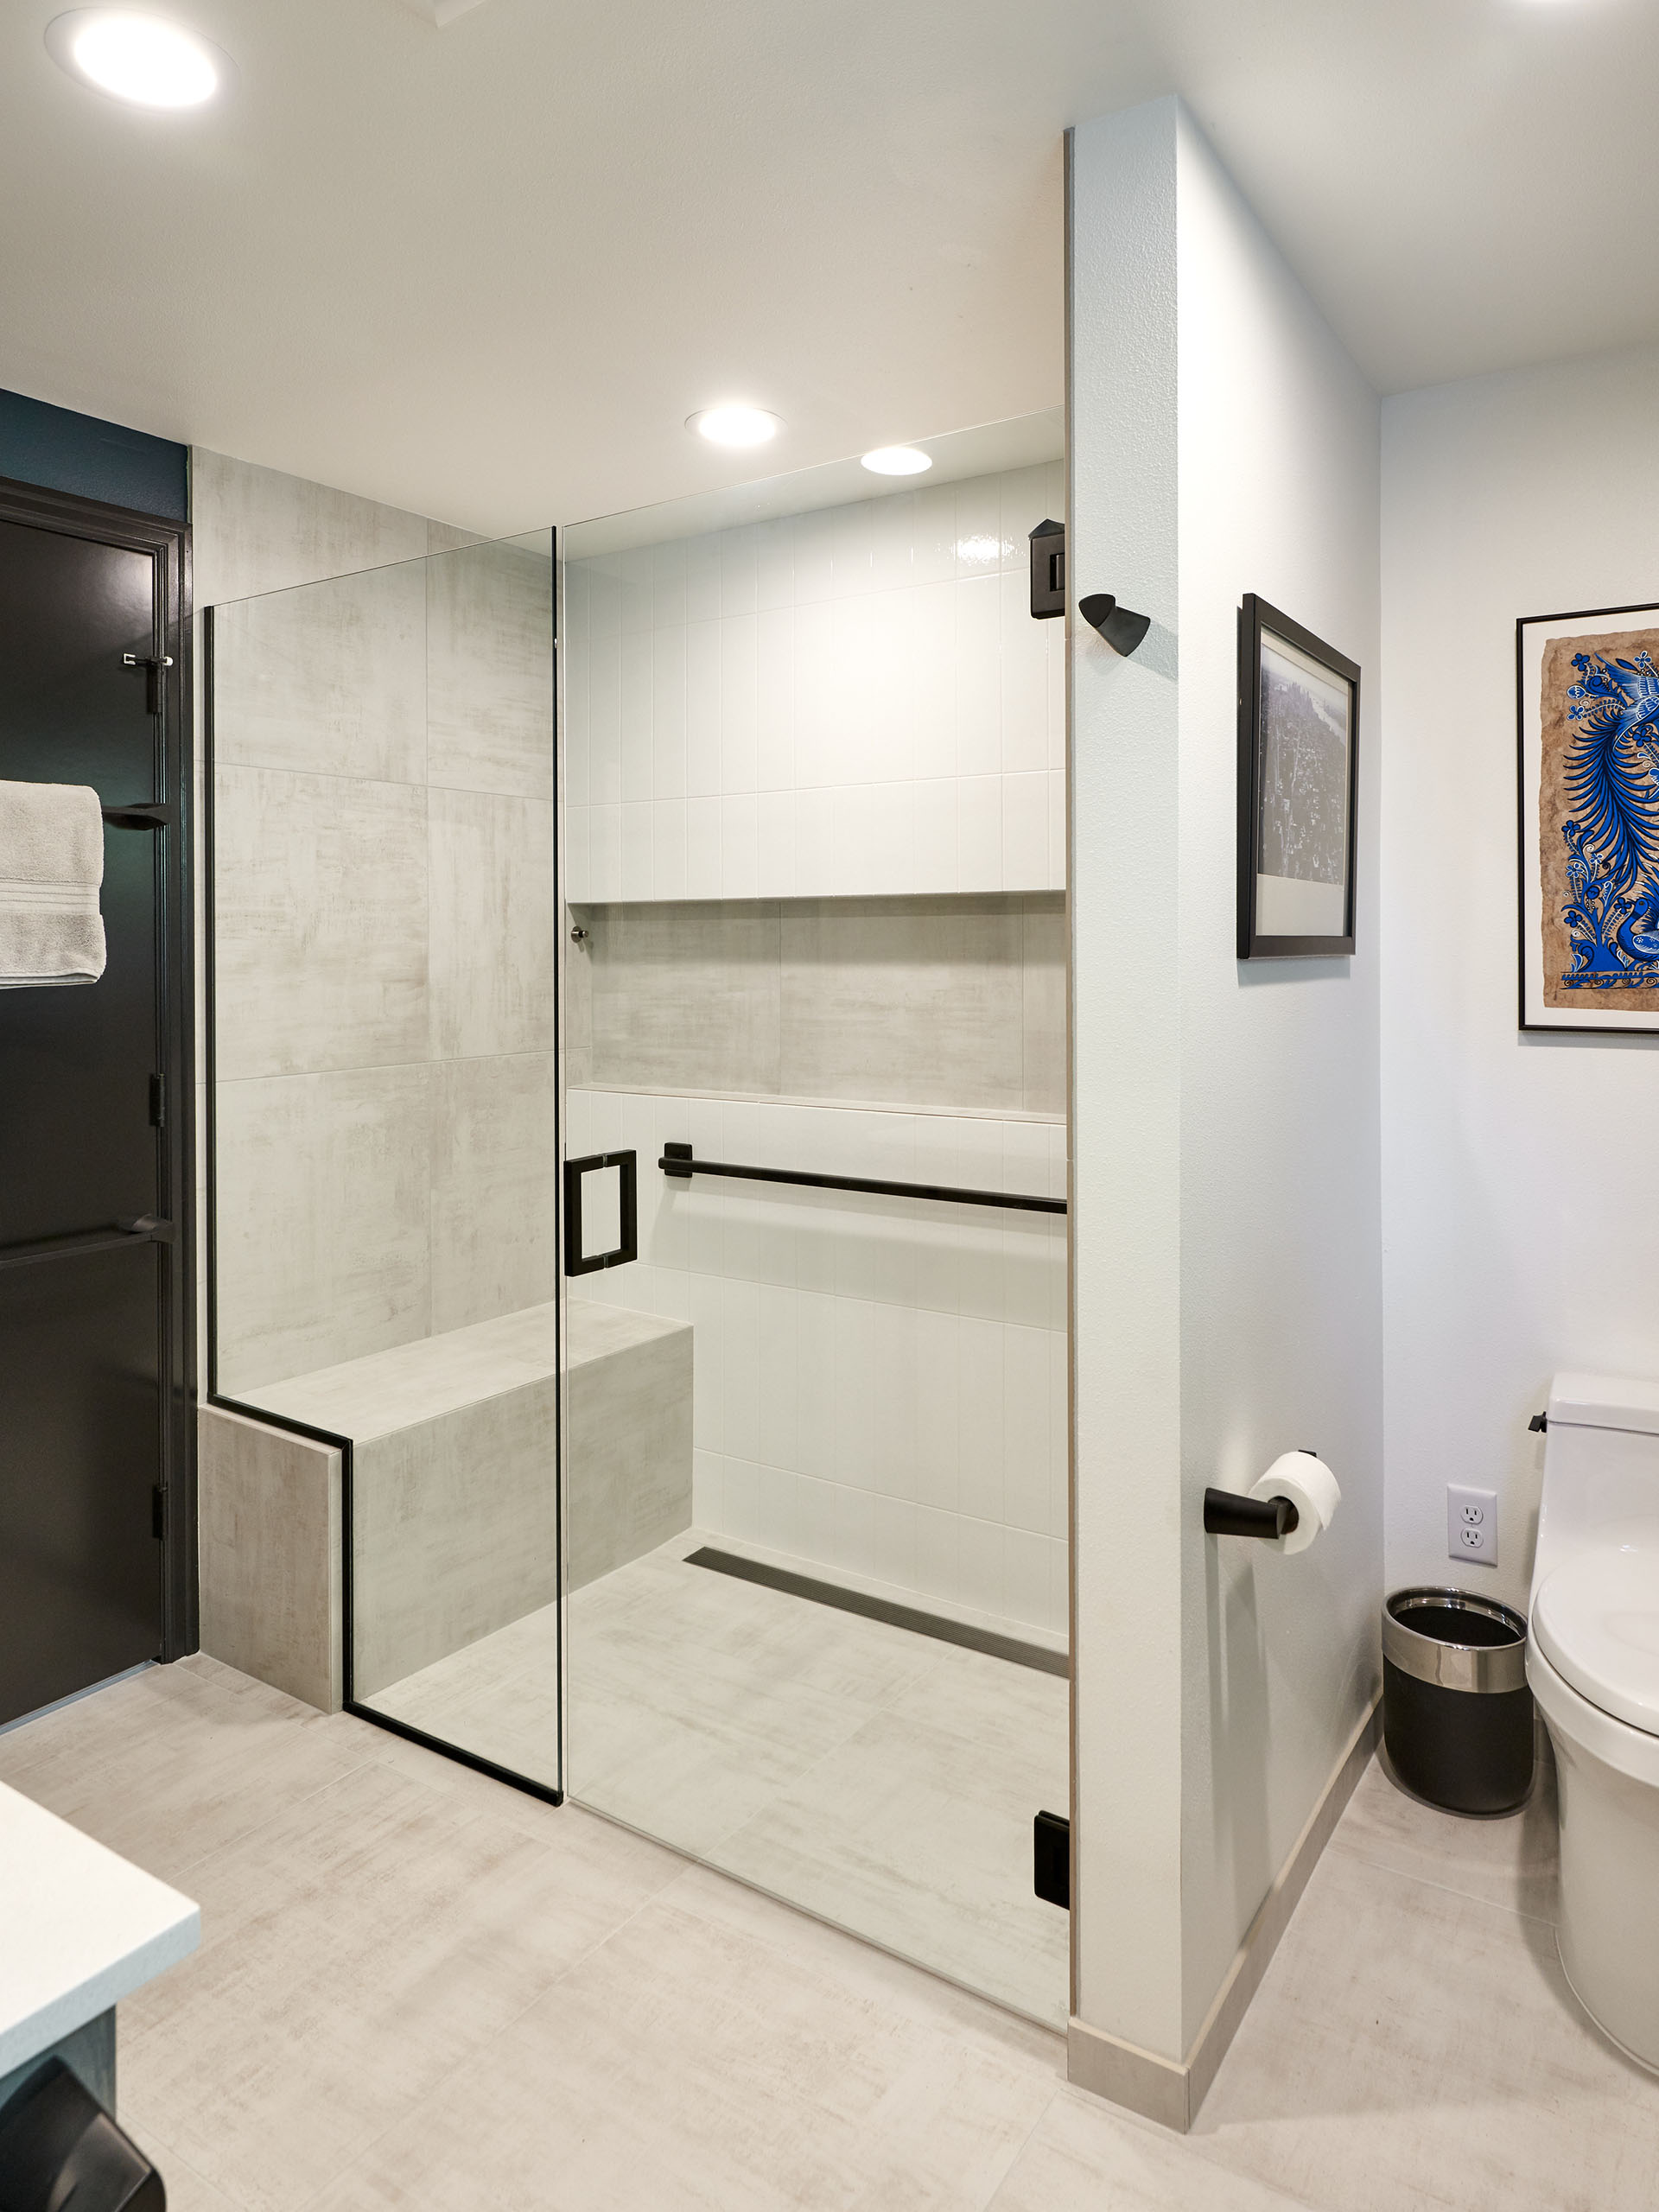 universal design and your forever home - aging in place curbless shower with built in bench - henderer design and build